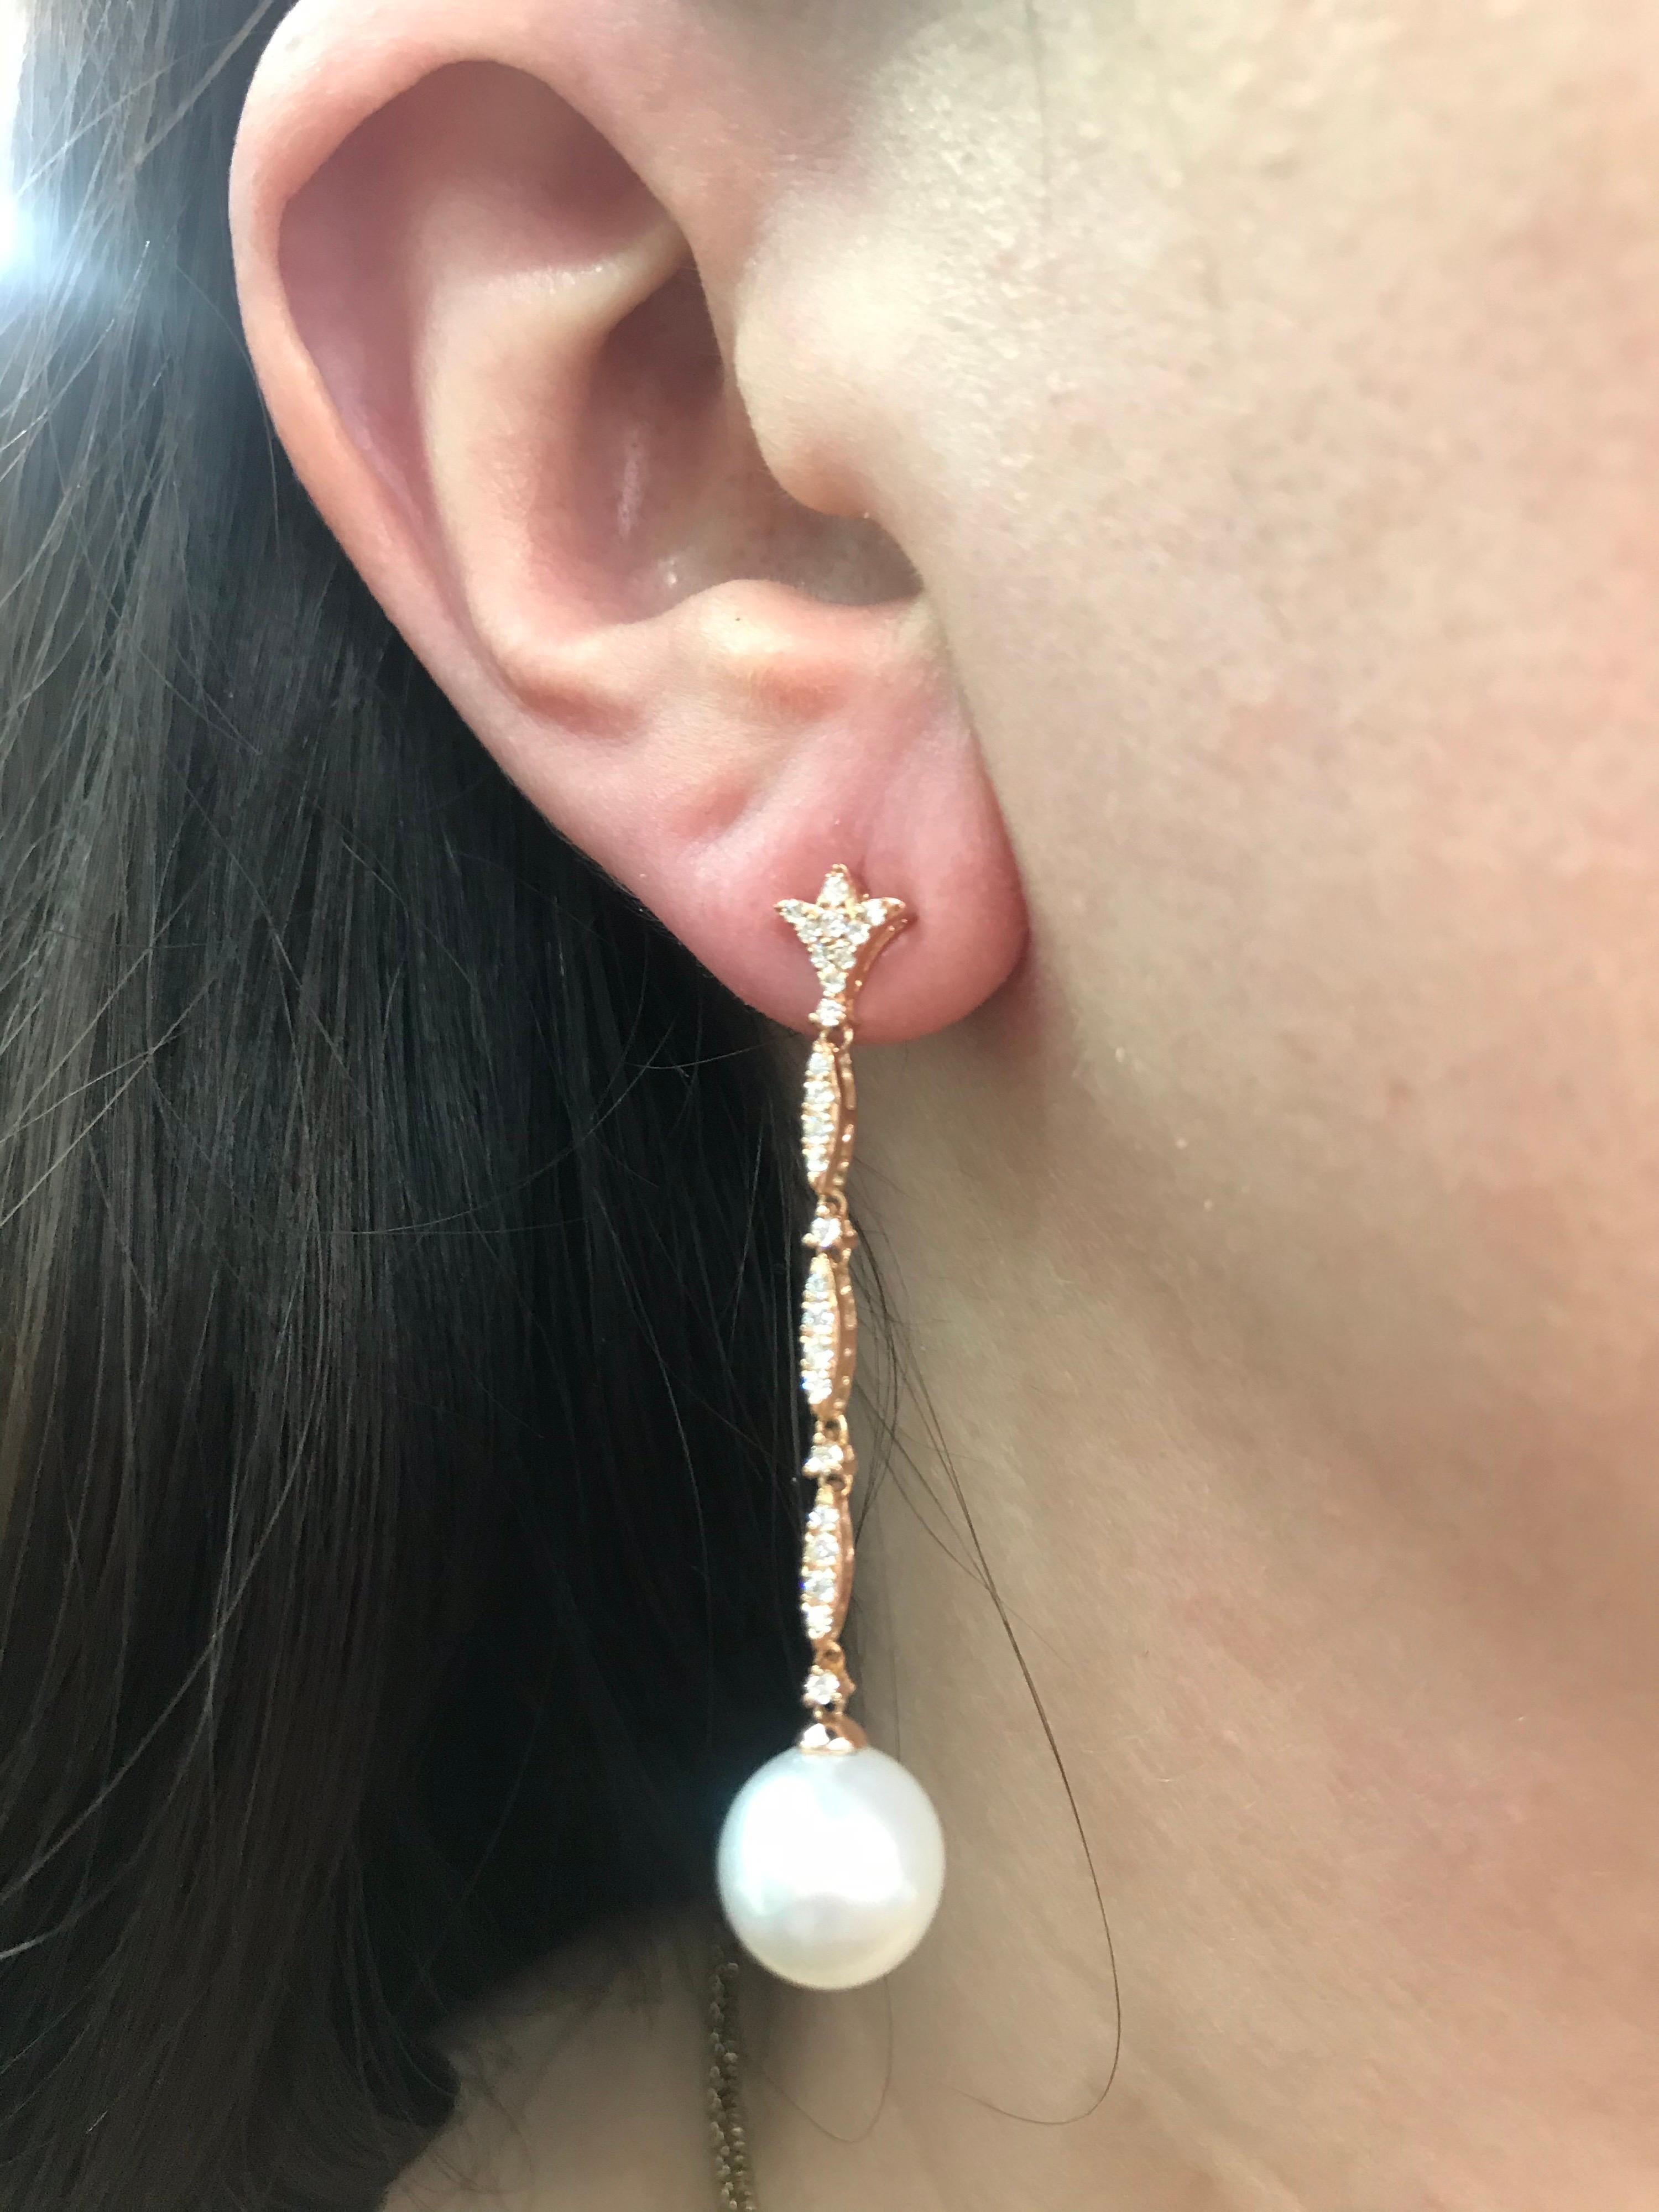 18K Rose gold drop earrings featuring 40 round brilliants weighing 0.42 carats and two South Sea Pearls measuring 10-11 mm. 